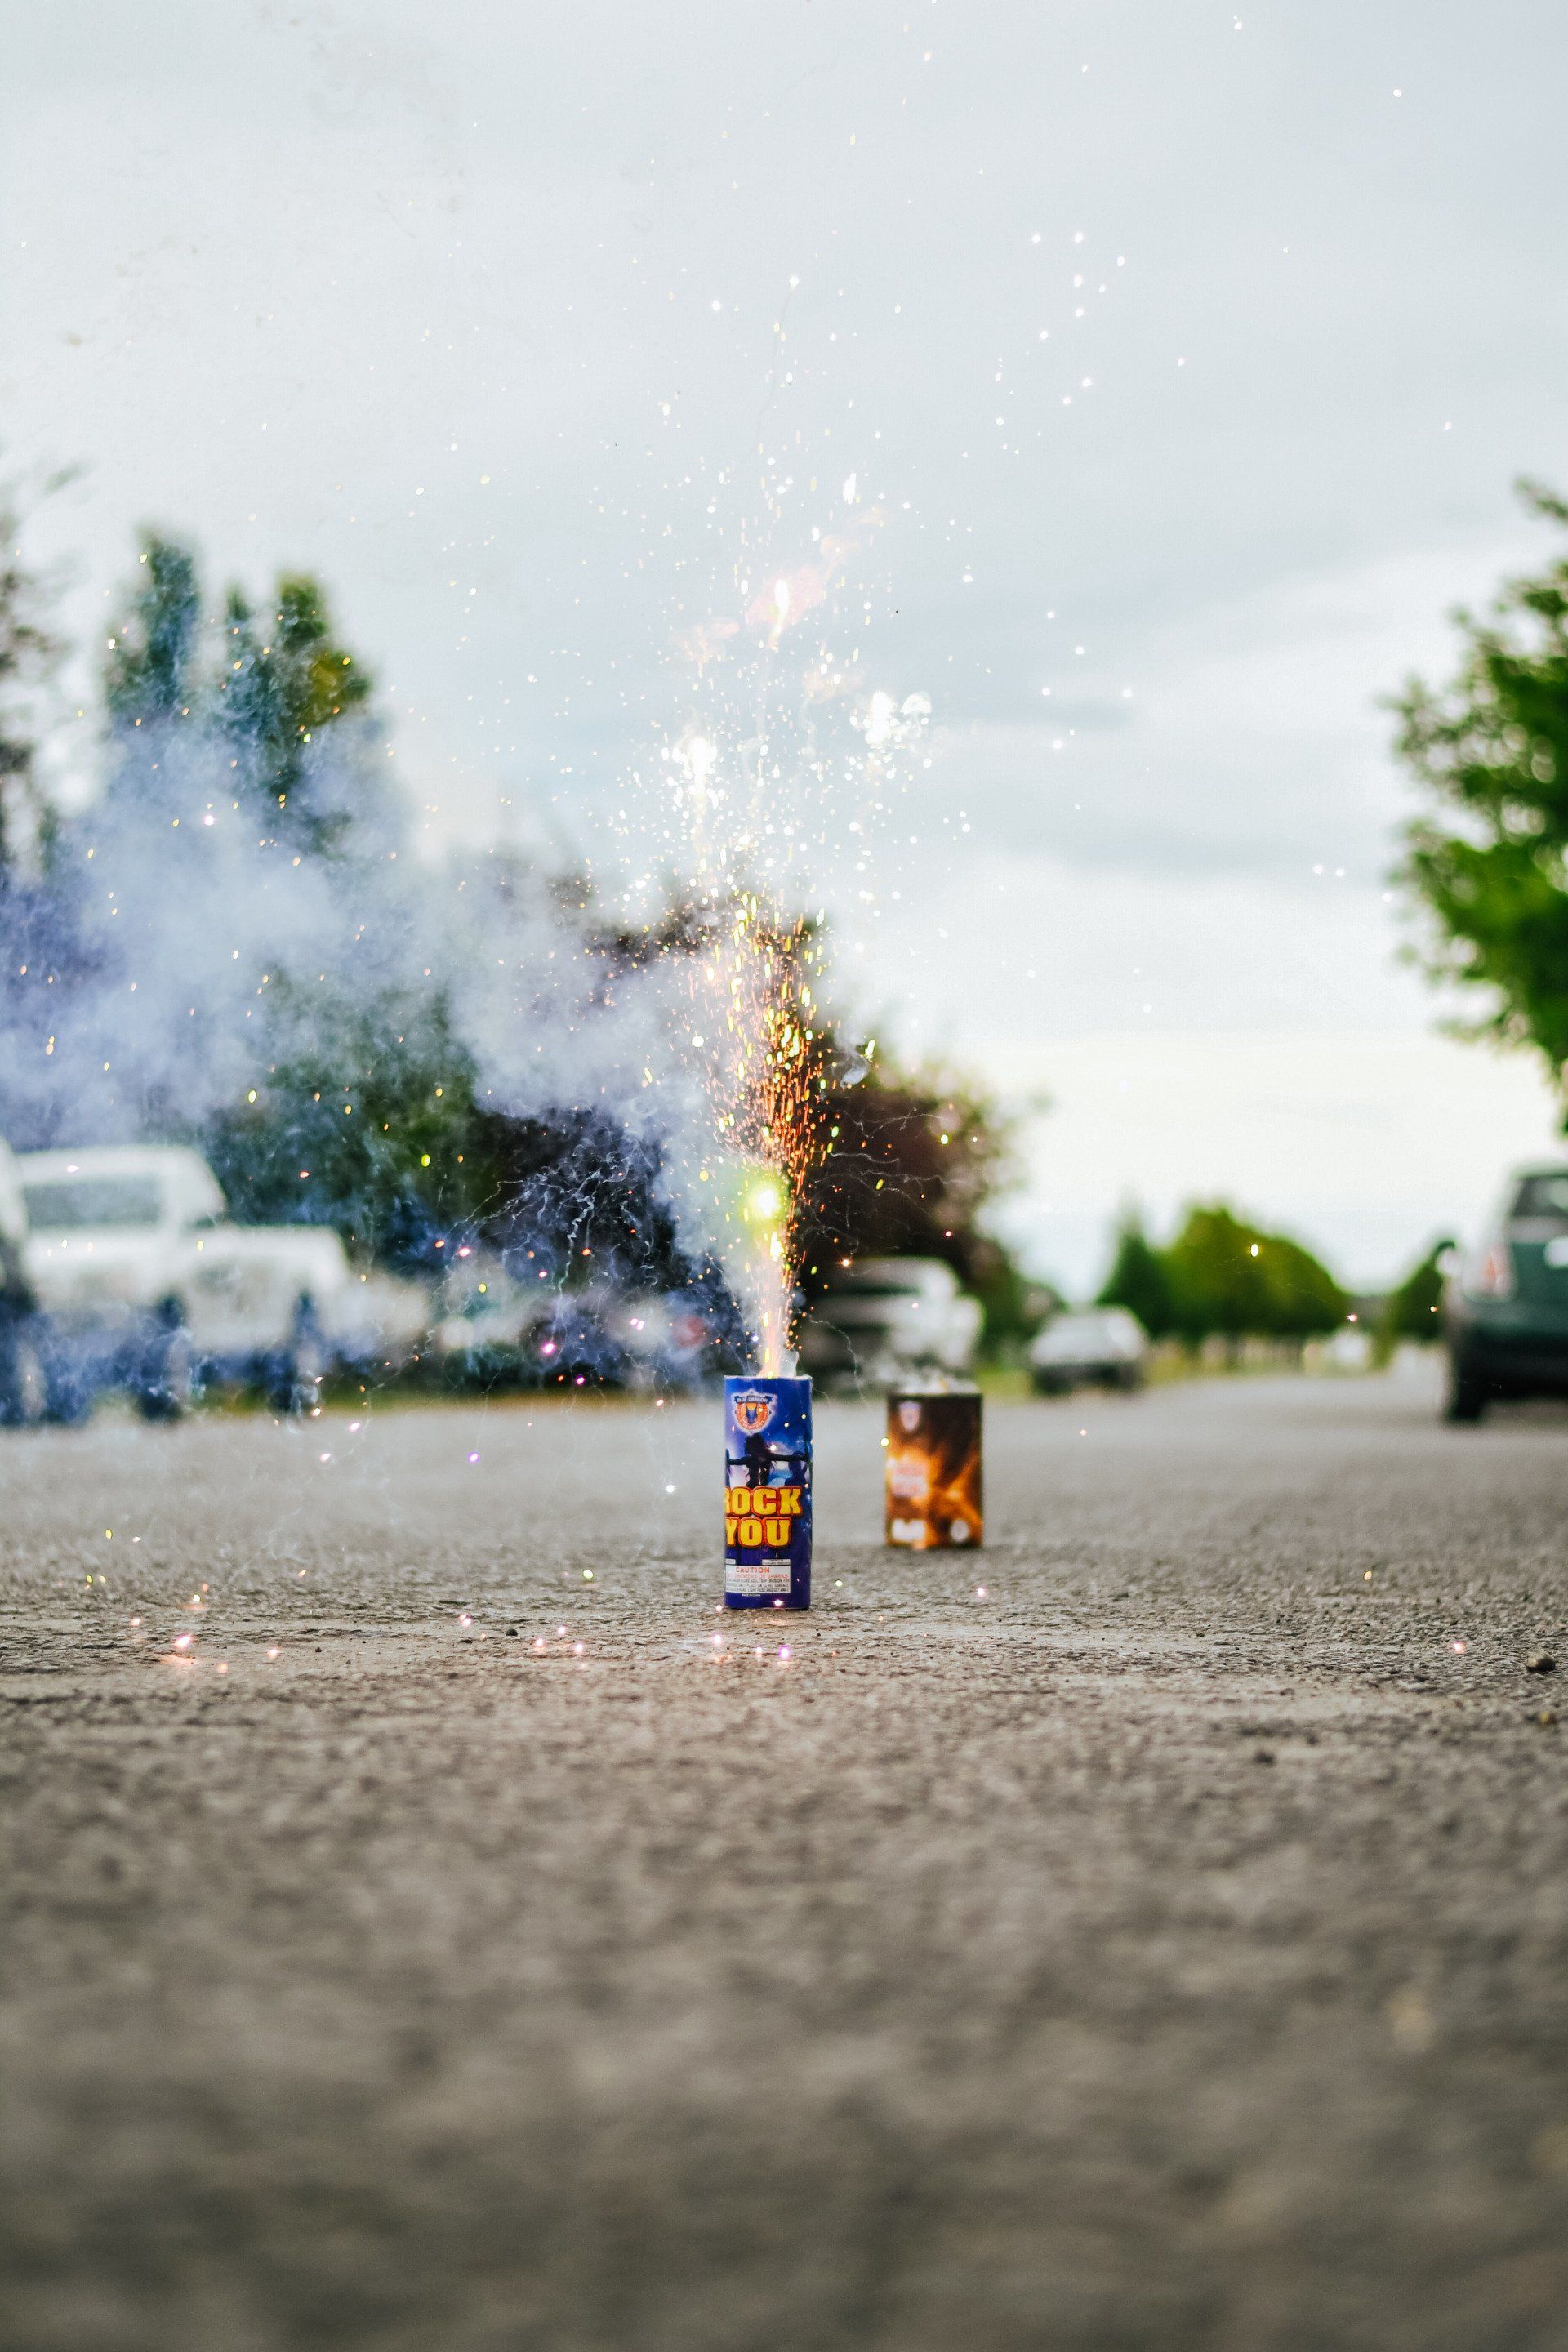 How to properly dispose of fireworks - Xpress Dumpster Rentals